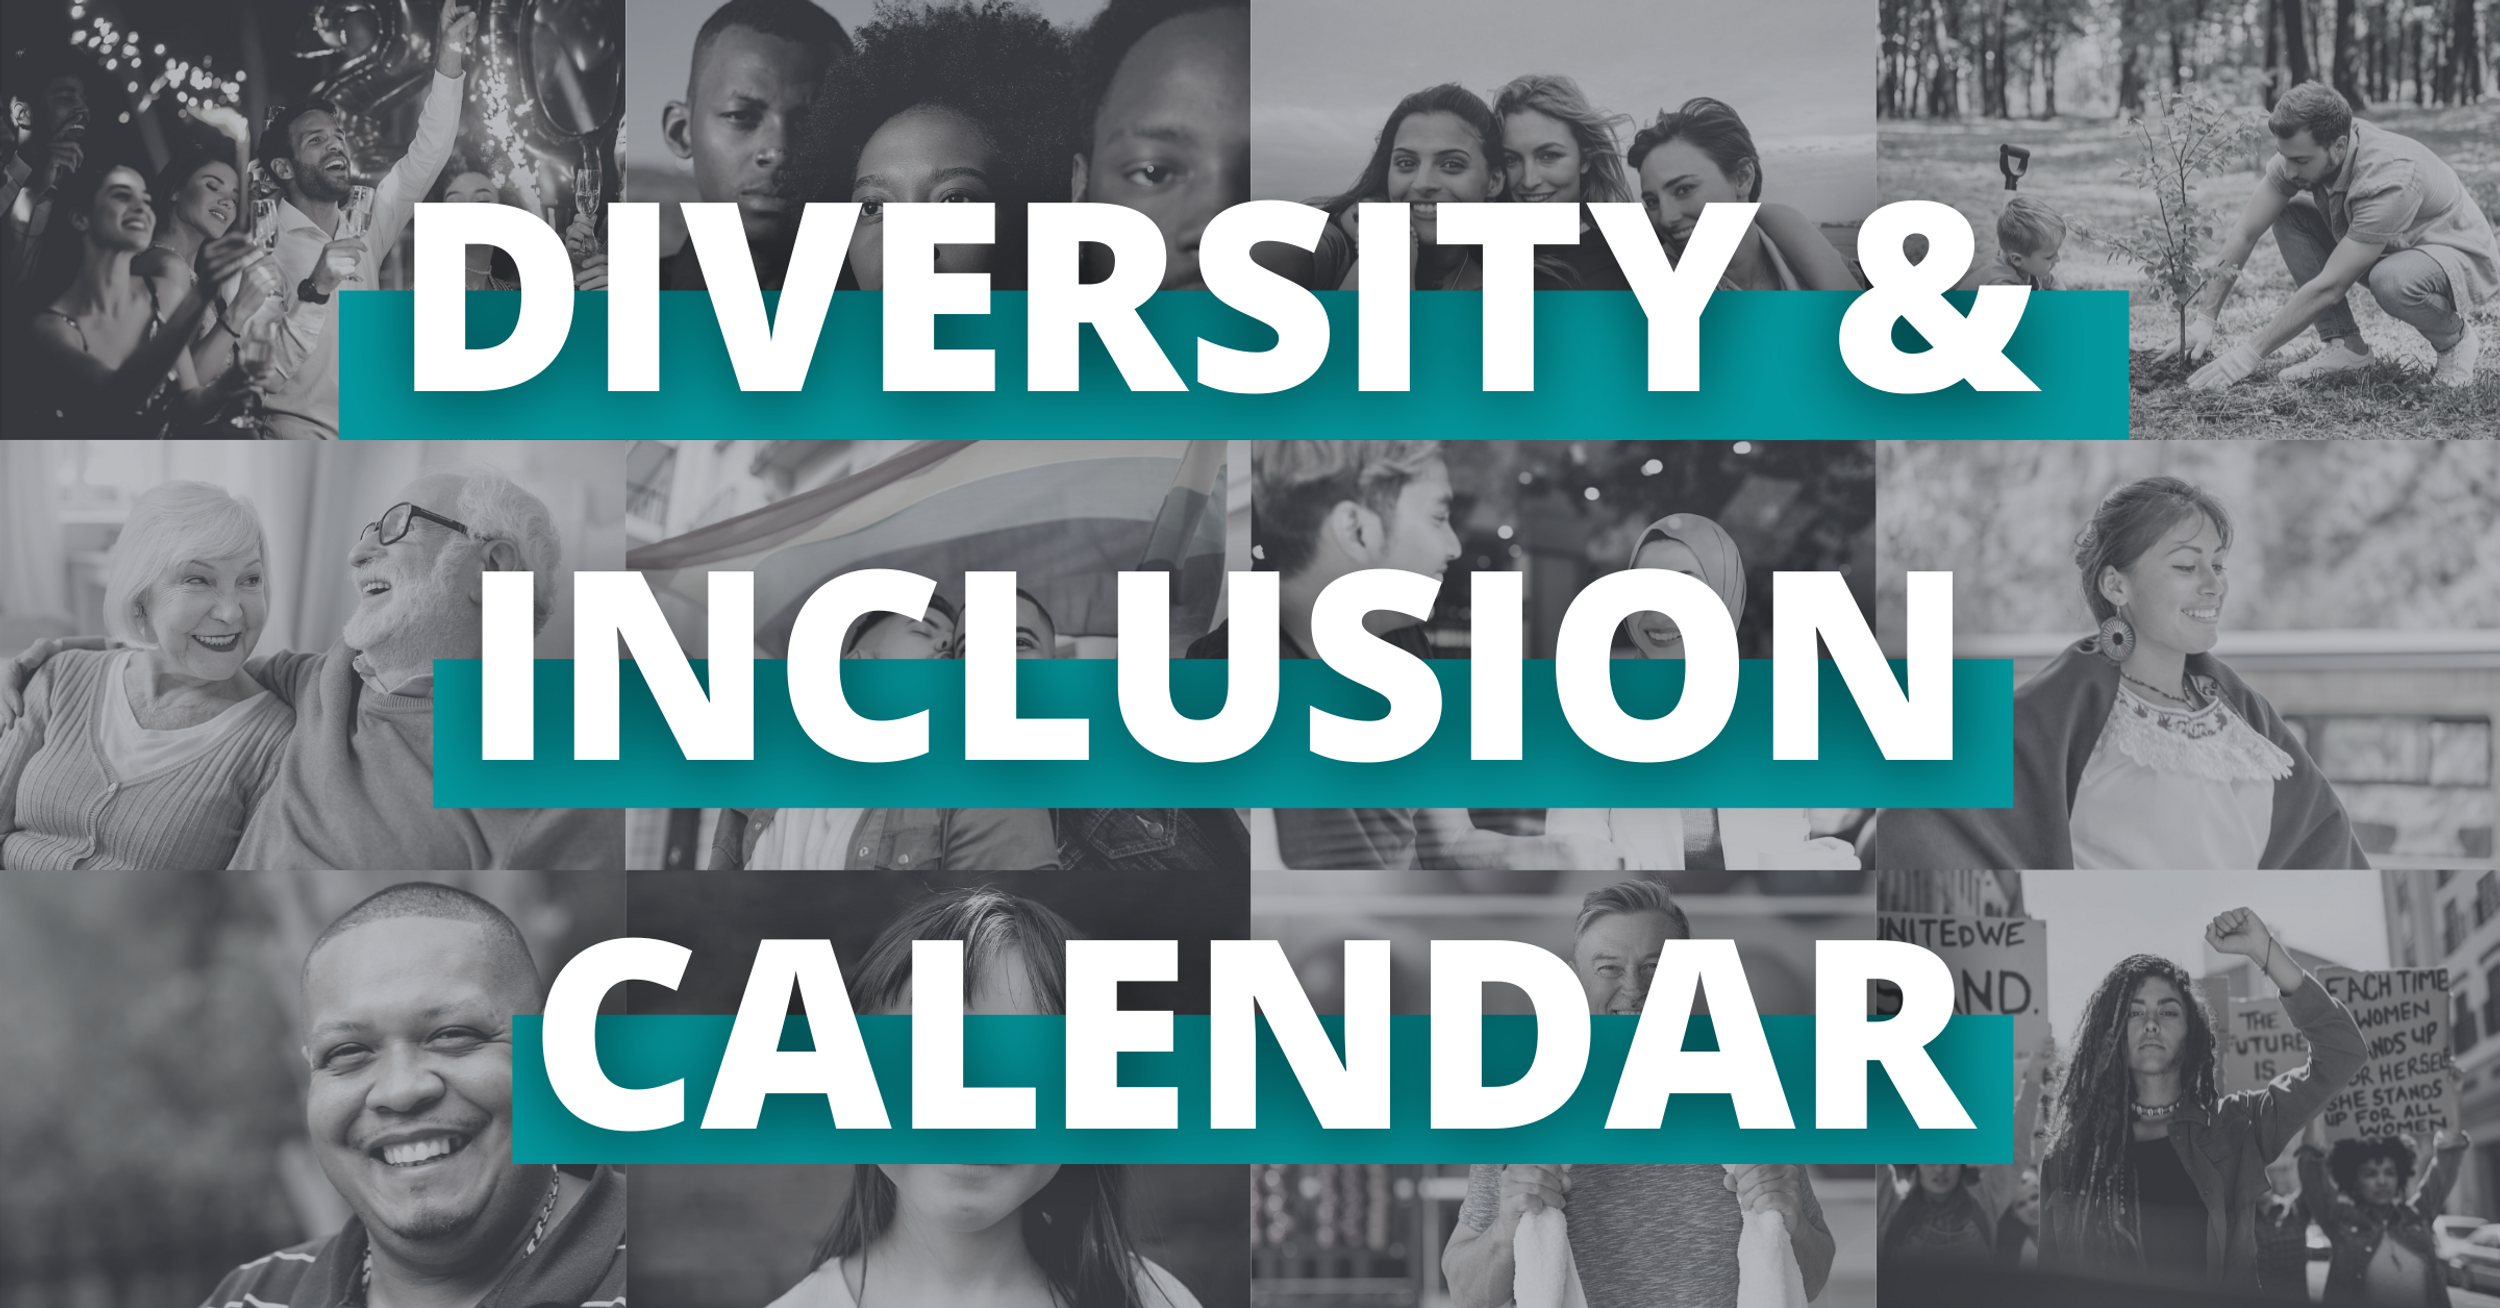 Diversity and Inclusion Calendar